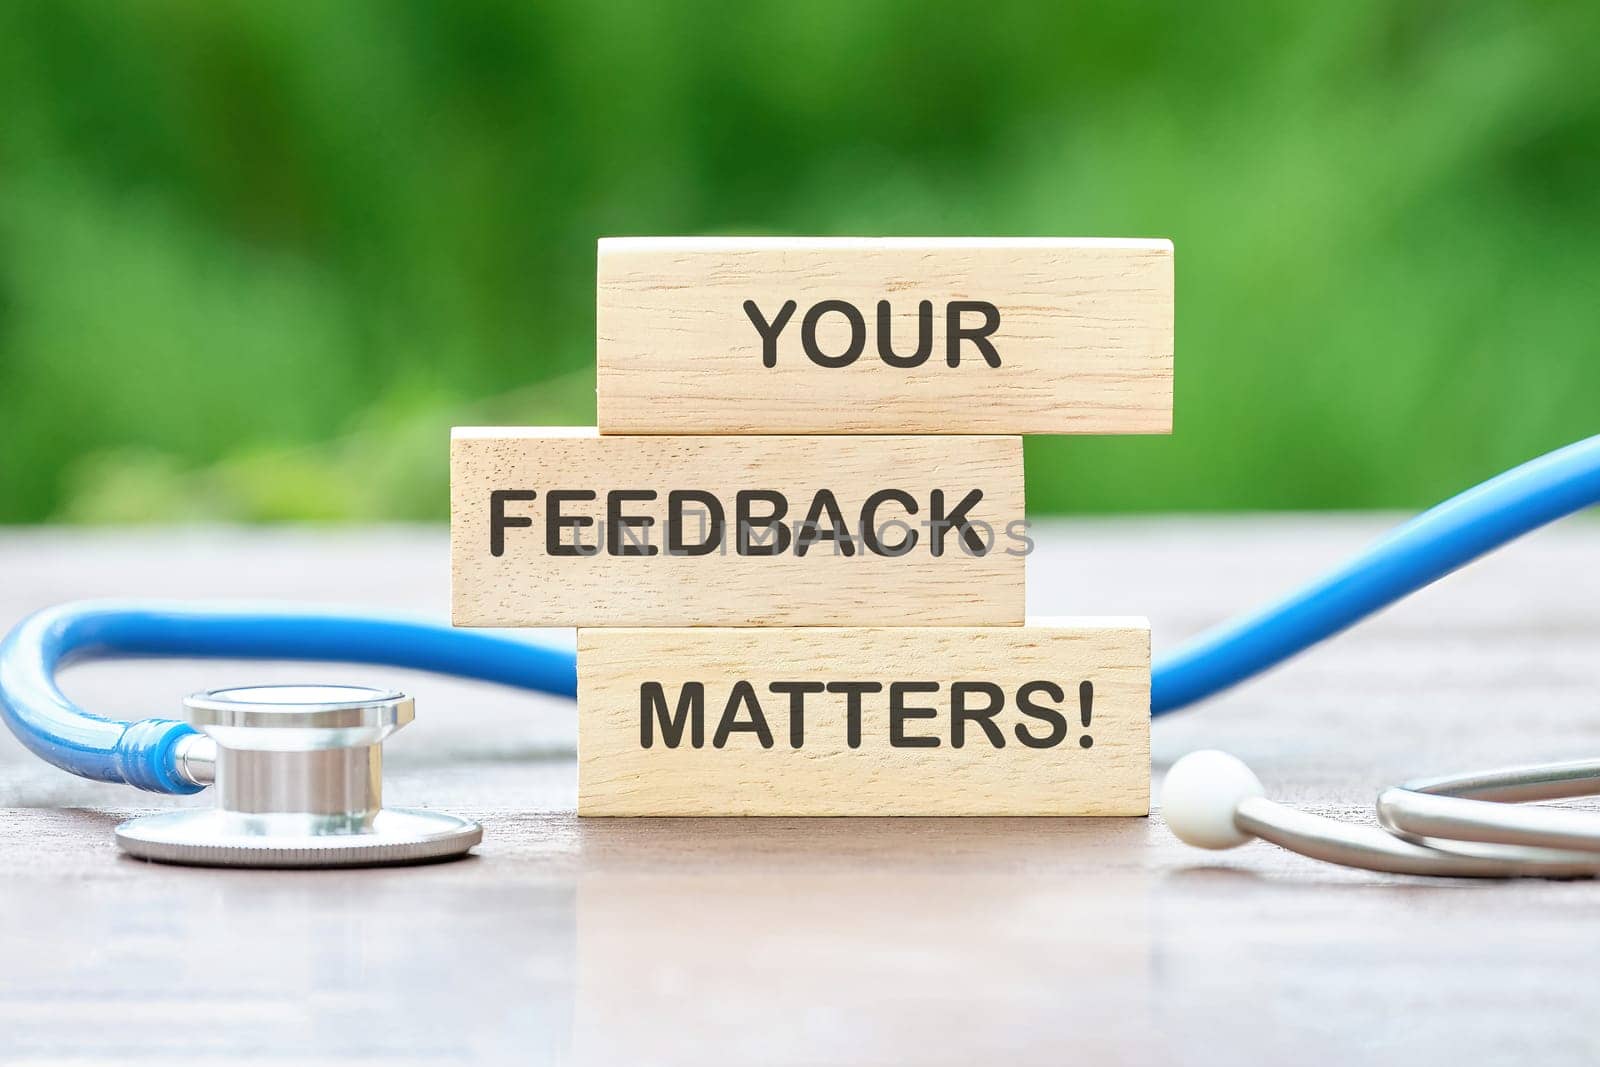 YOUR FEEDBACK MATTERS text on wooden blocks on a green background